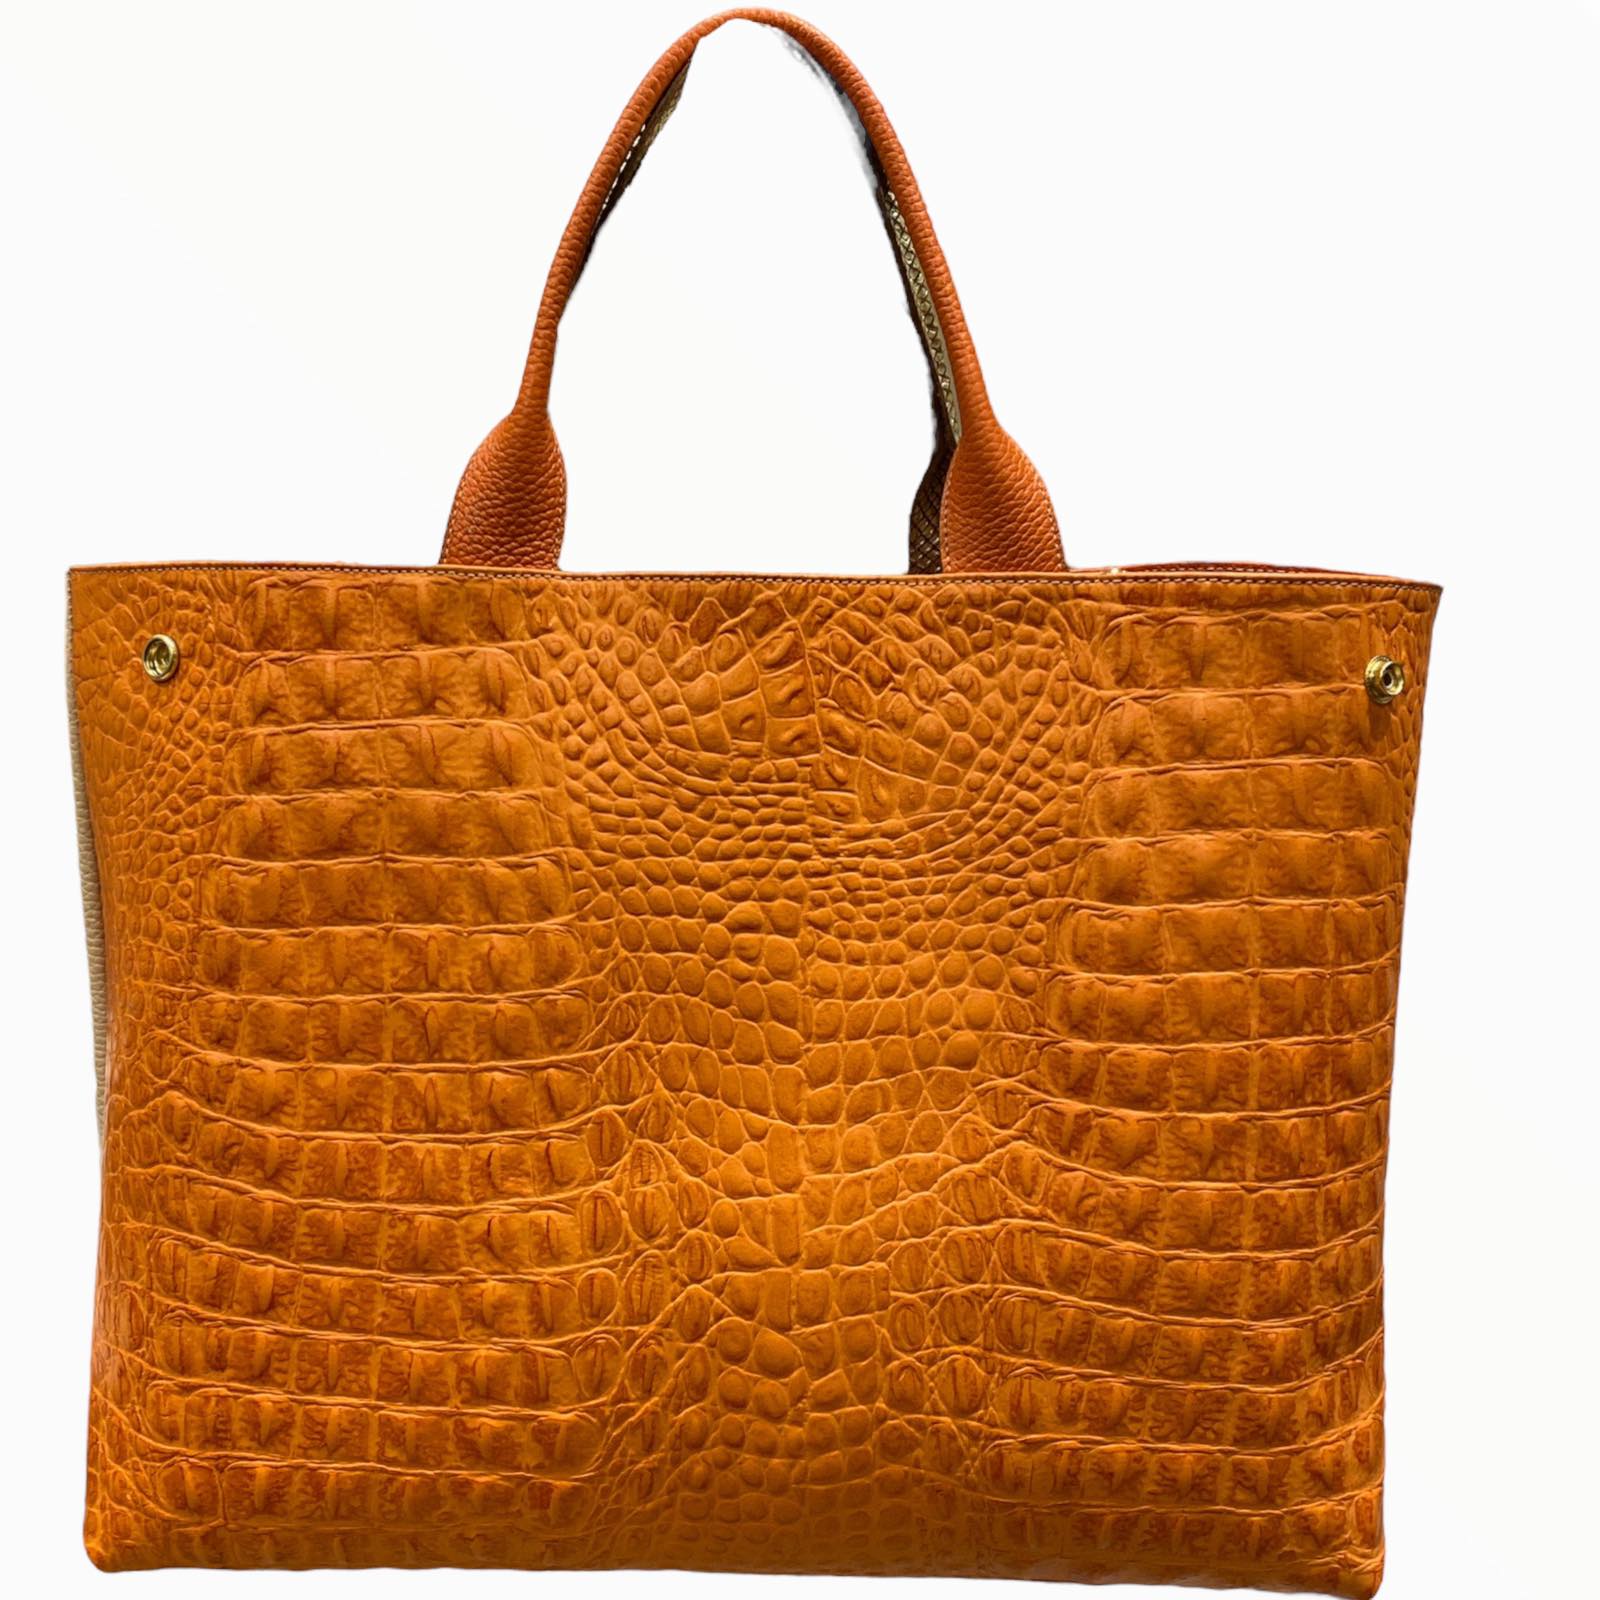 Tribeca L. Aperol and nude double face leather tote bag